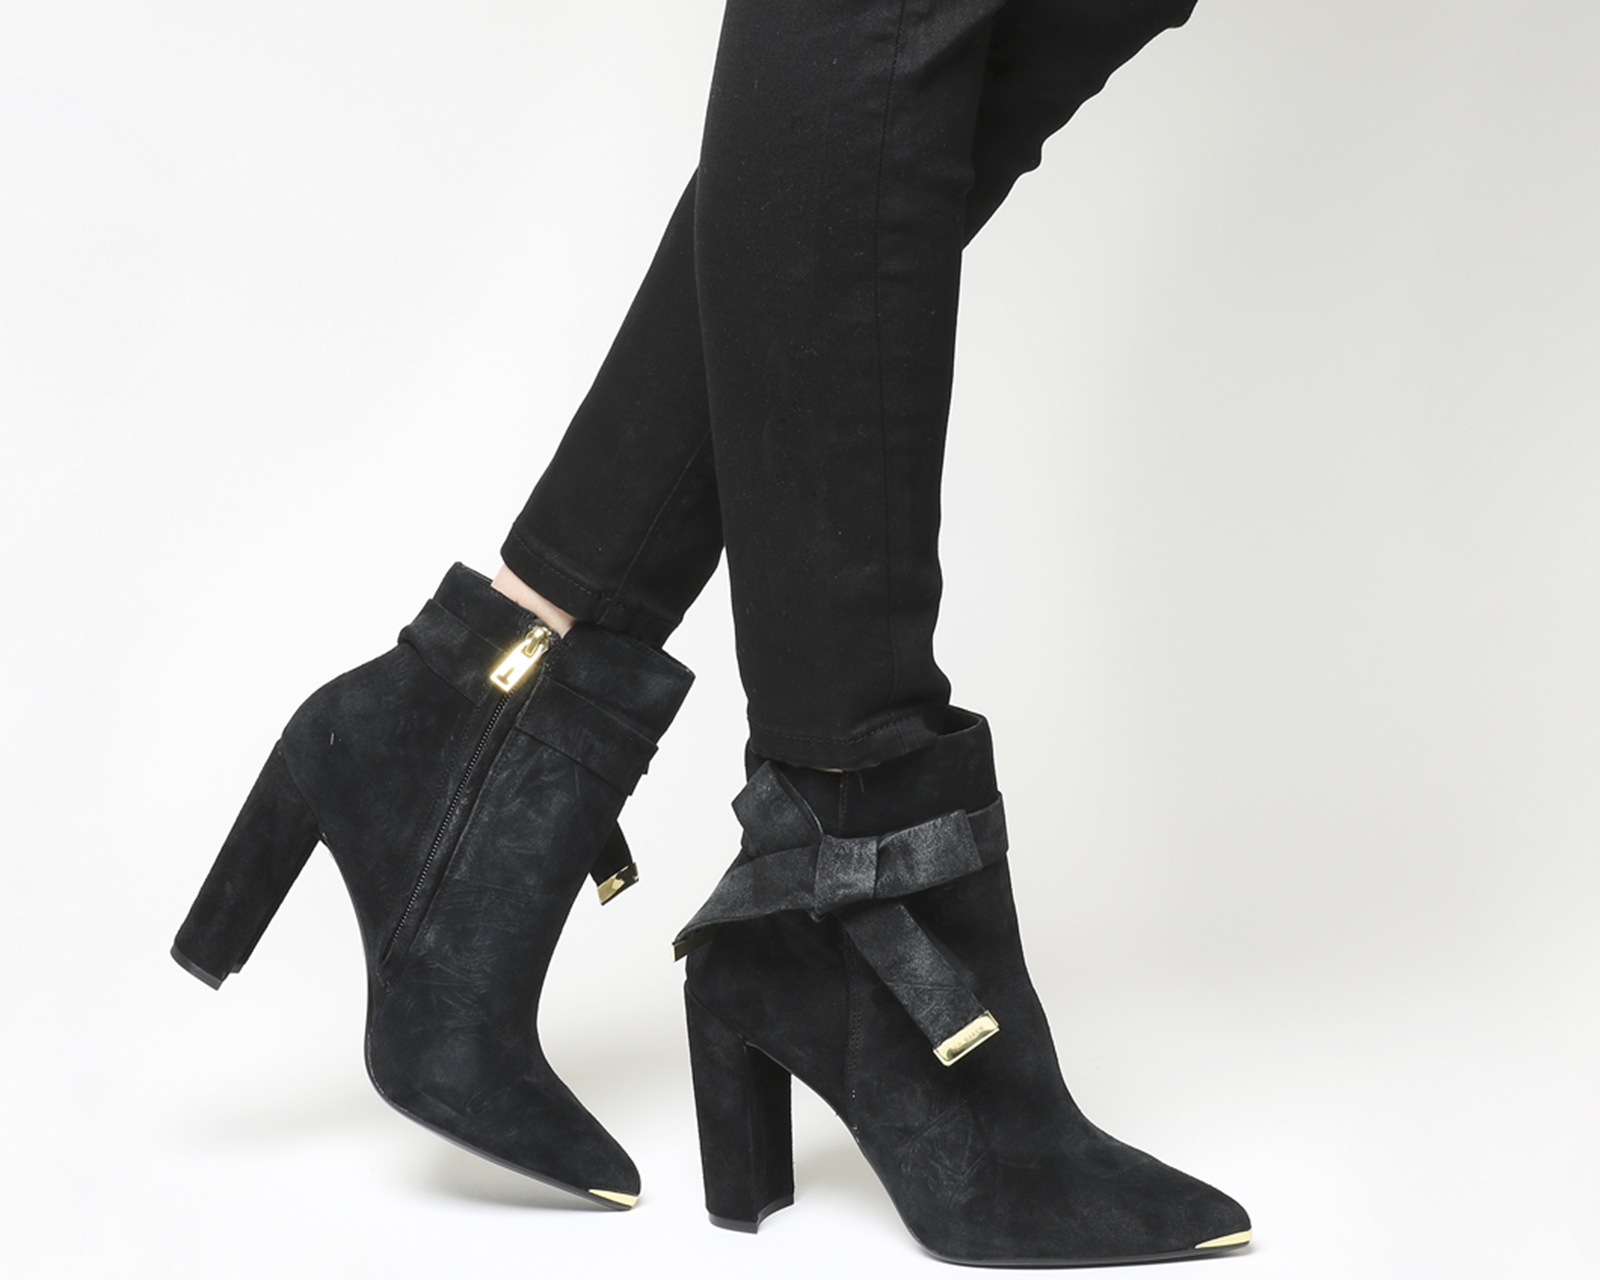 black ankle boots with bow